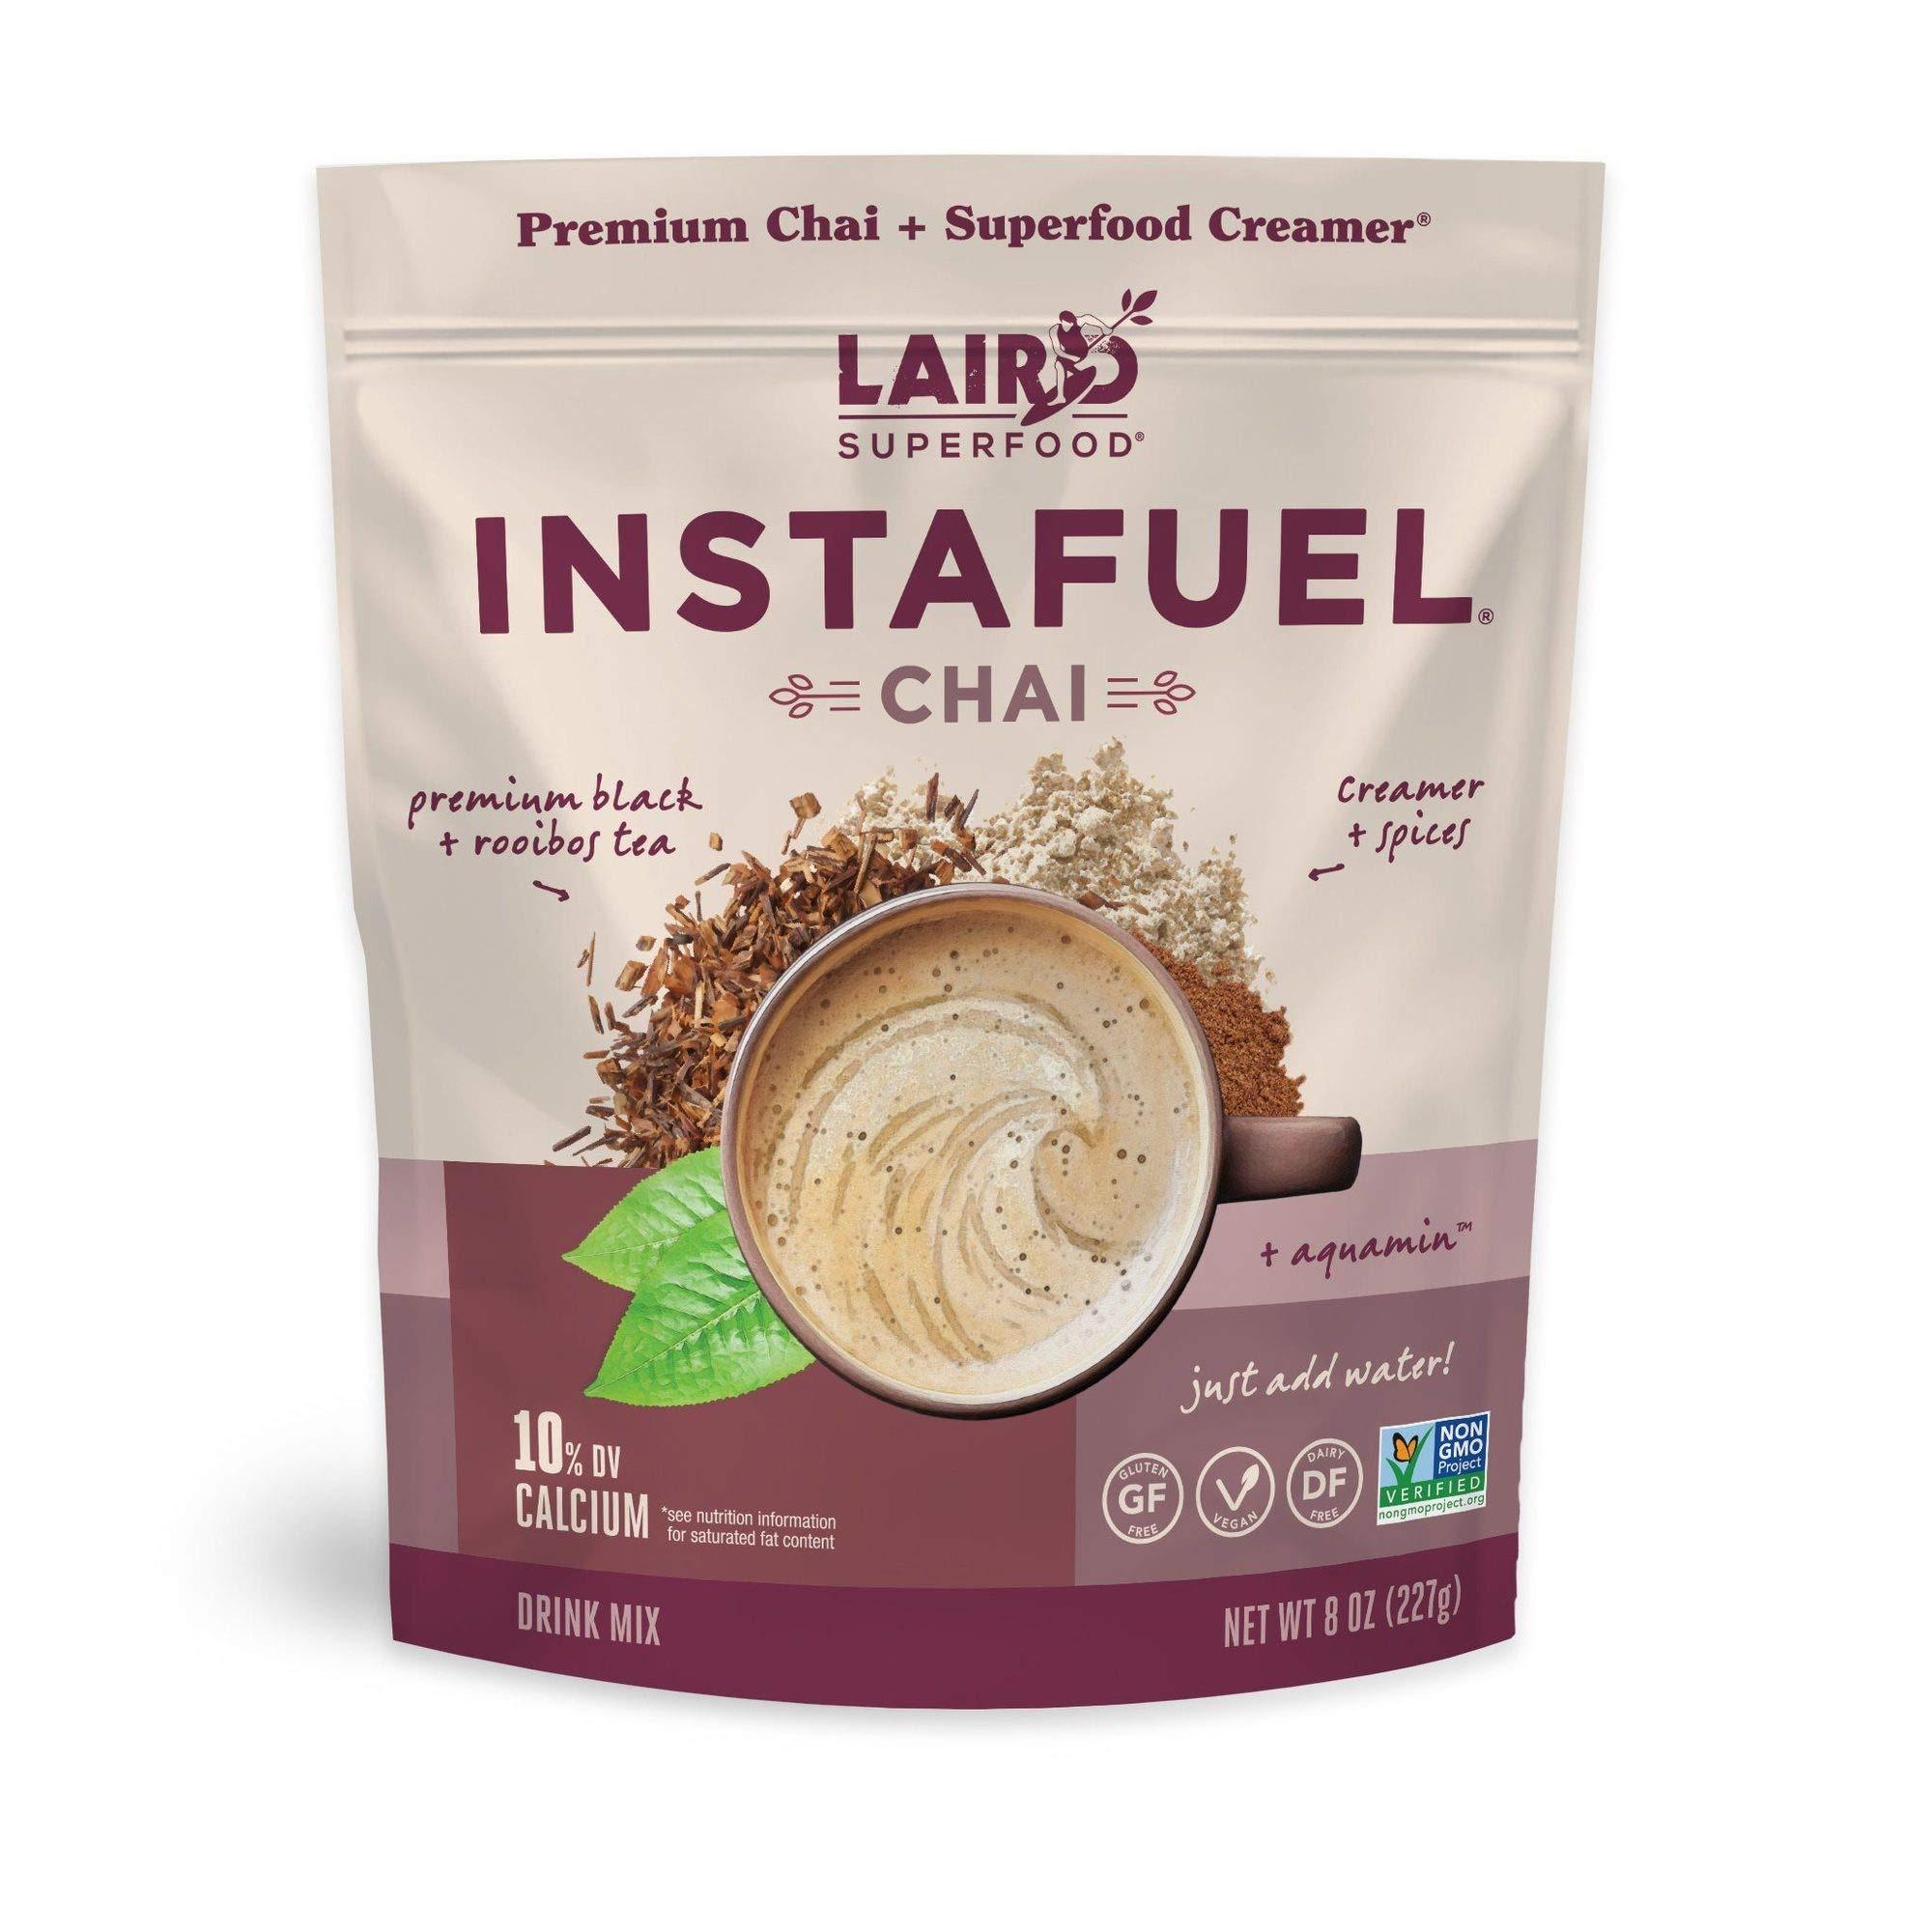 Laird Superfood Instafuel Chai Latte Powder - Delicious Mix of Instant Chai Tea and Our Original Superfood Non-Dairy Creamer, 8oz Bag - image 1 of 5